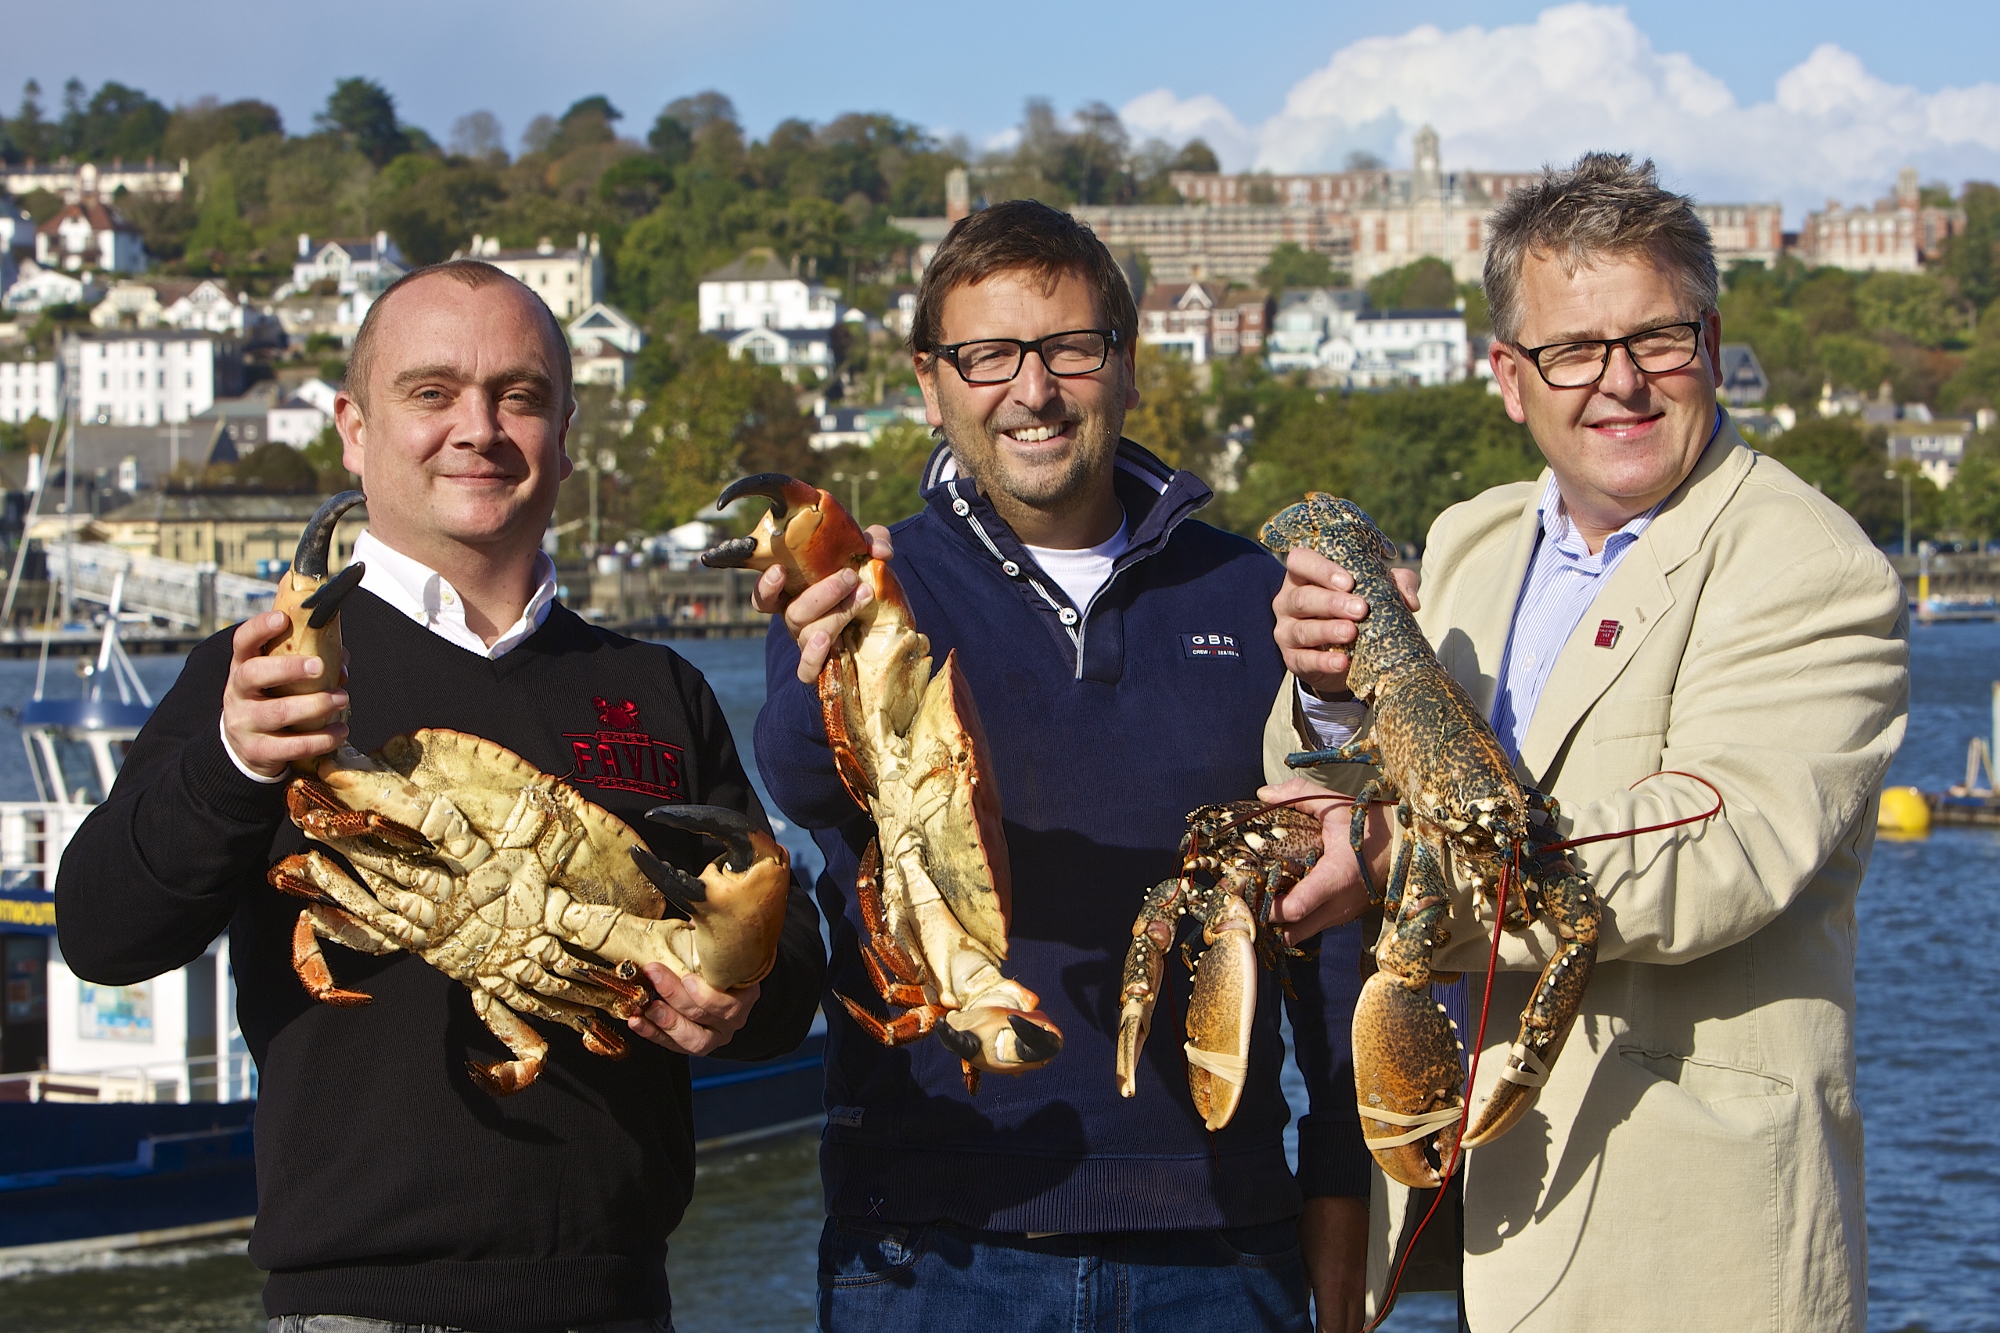 Free for all foodie extravaganza in Dartmouth this weekend The Exeter